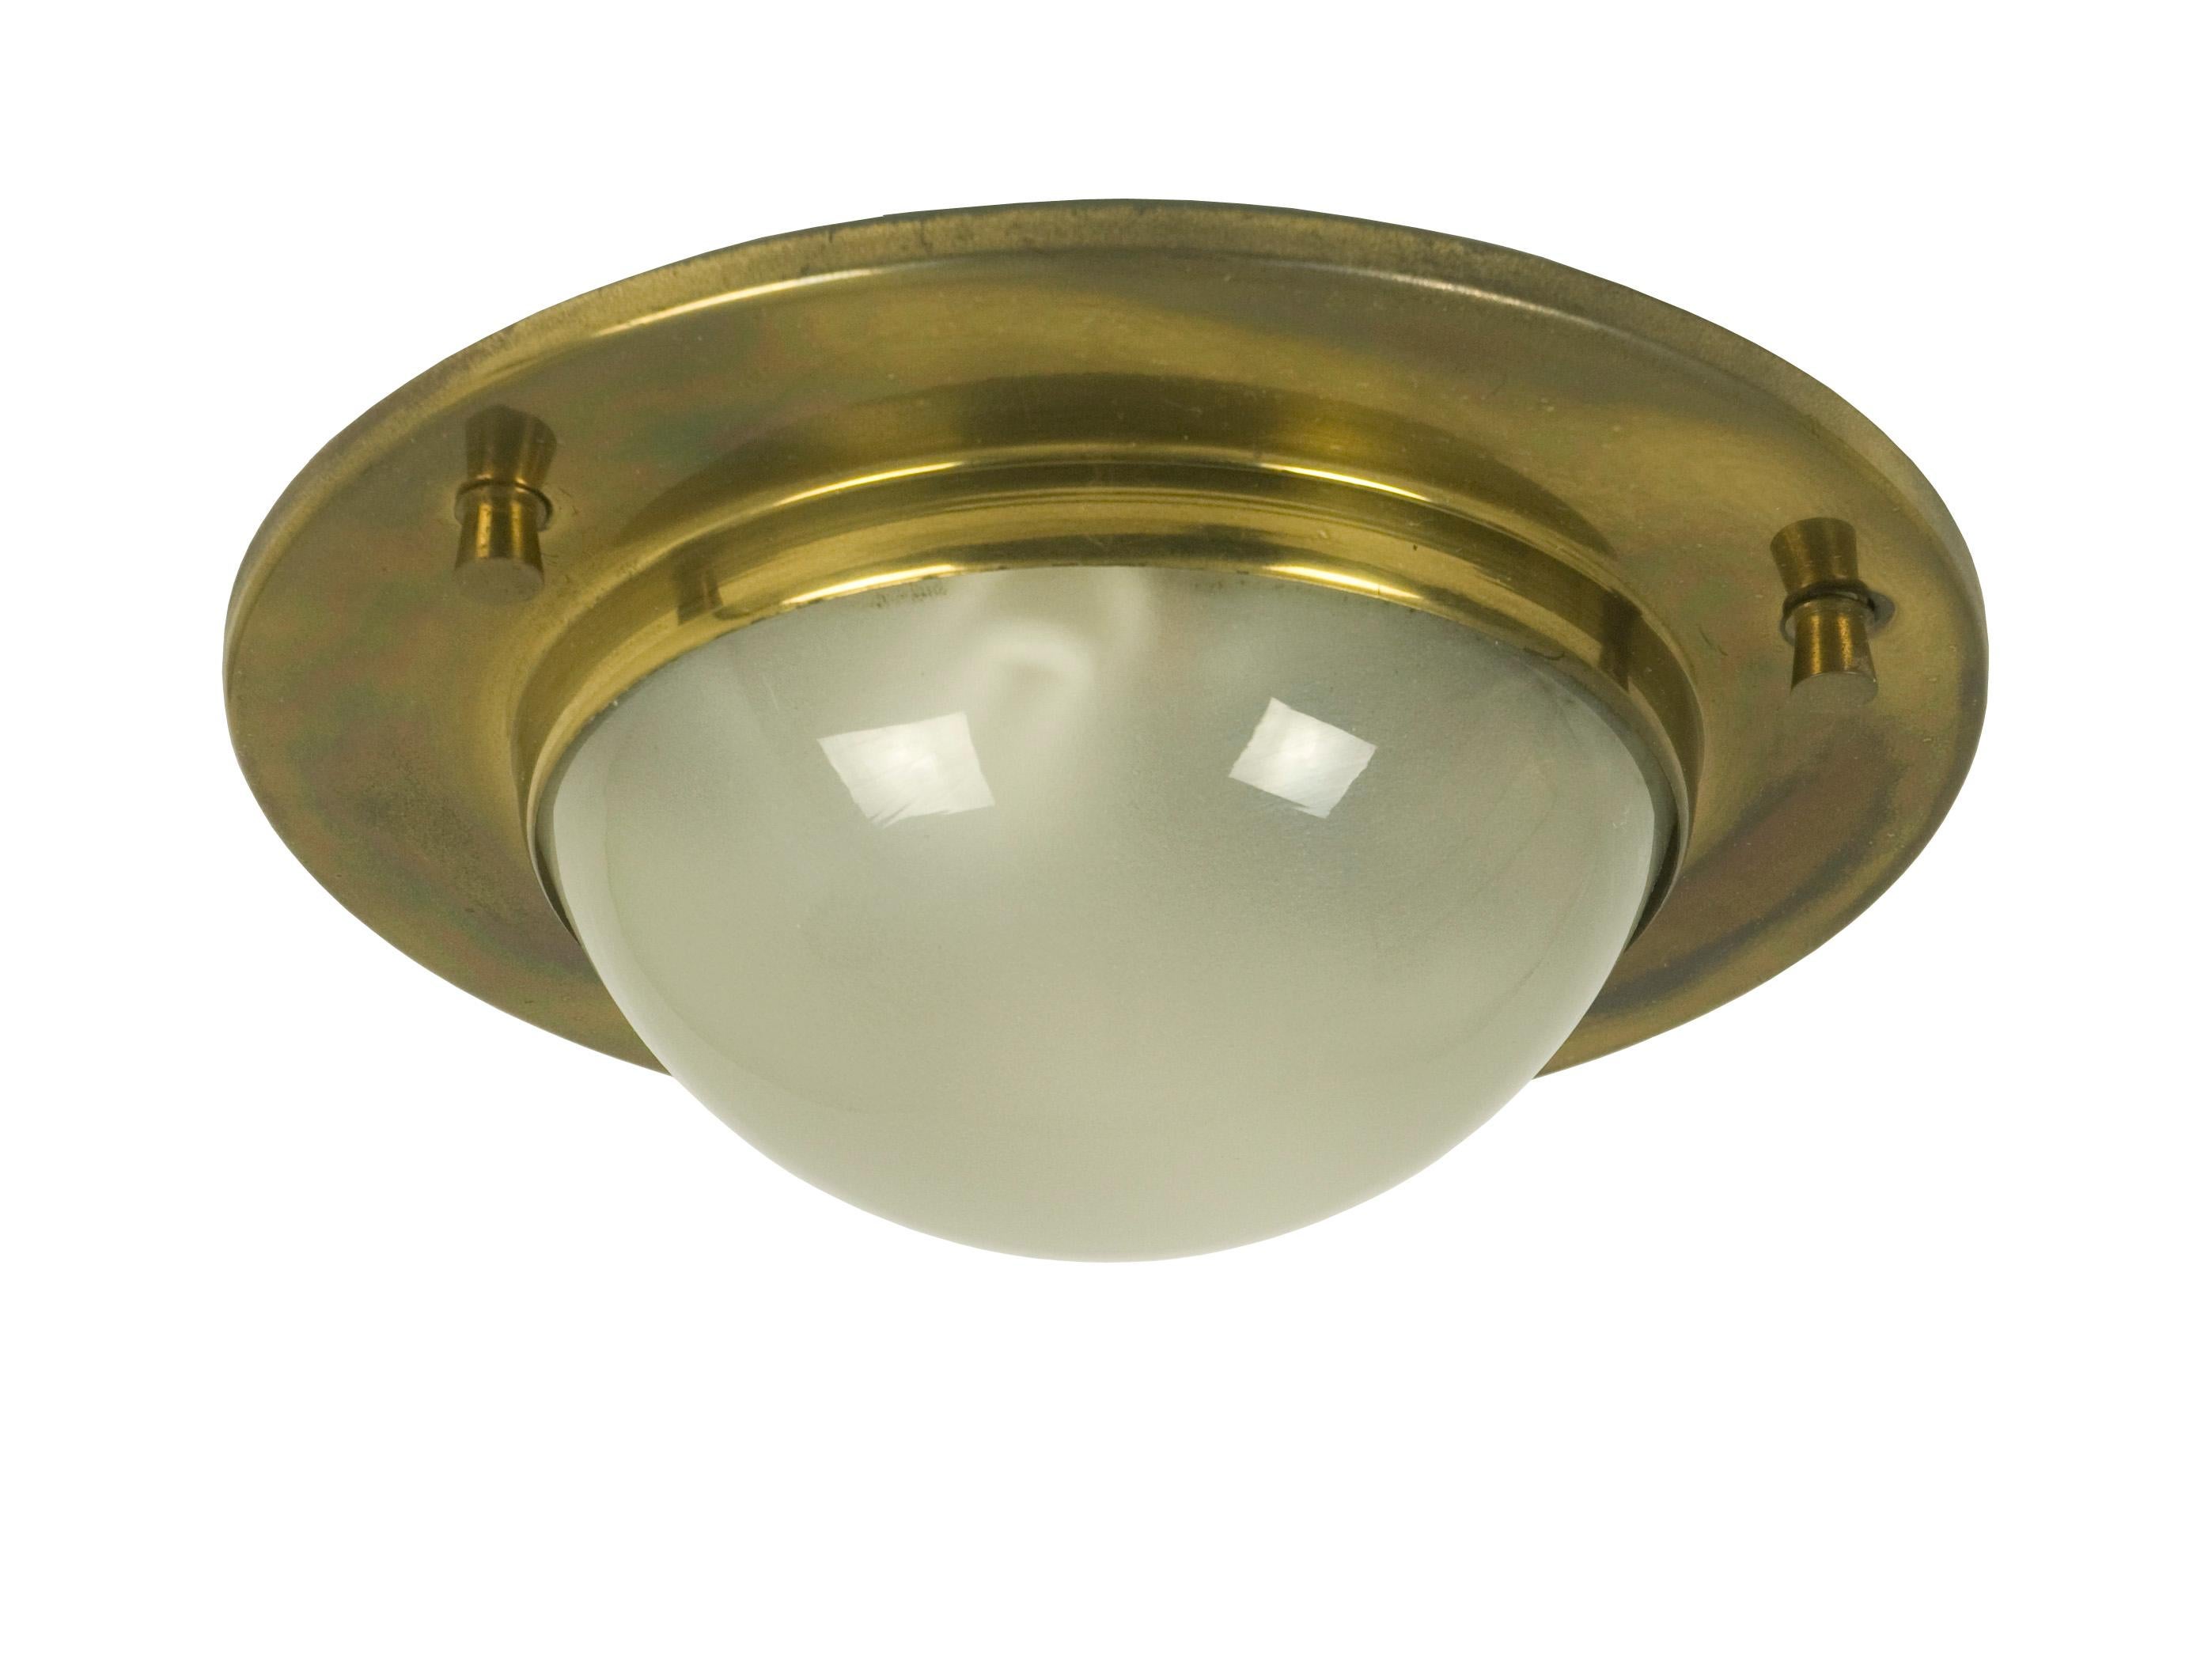 This set consists of 2 wall or ceiling lights made from brass and sandblasted glass. The lamps were produced in the late 1950s in the style of the famous Luigi Caccia Dominioni model 